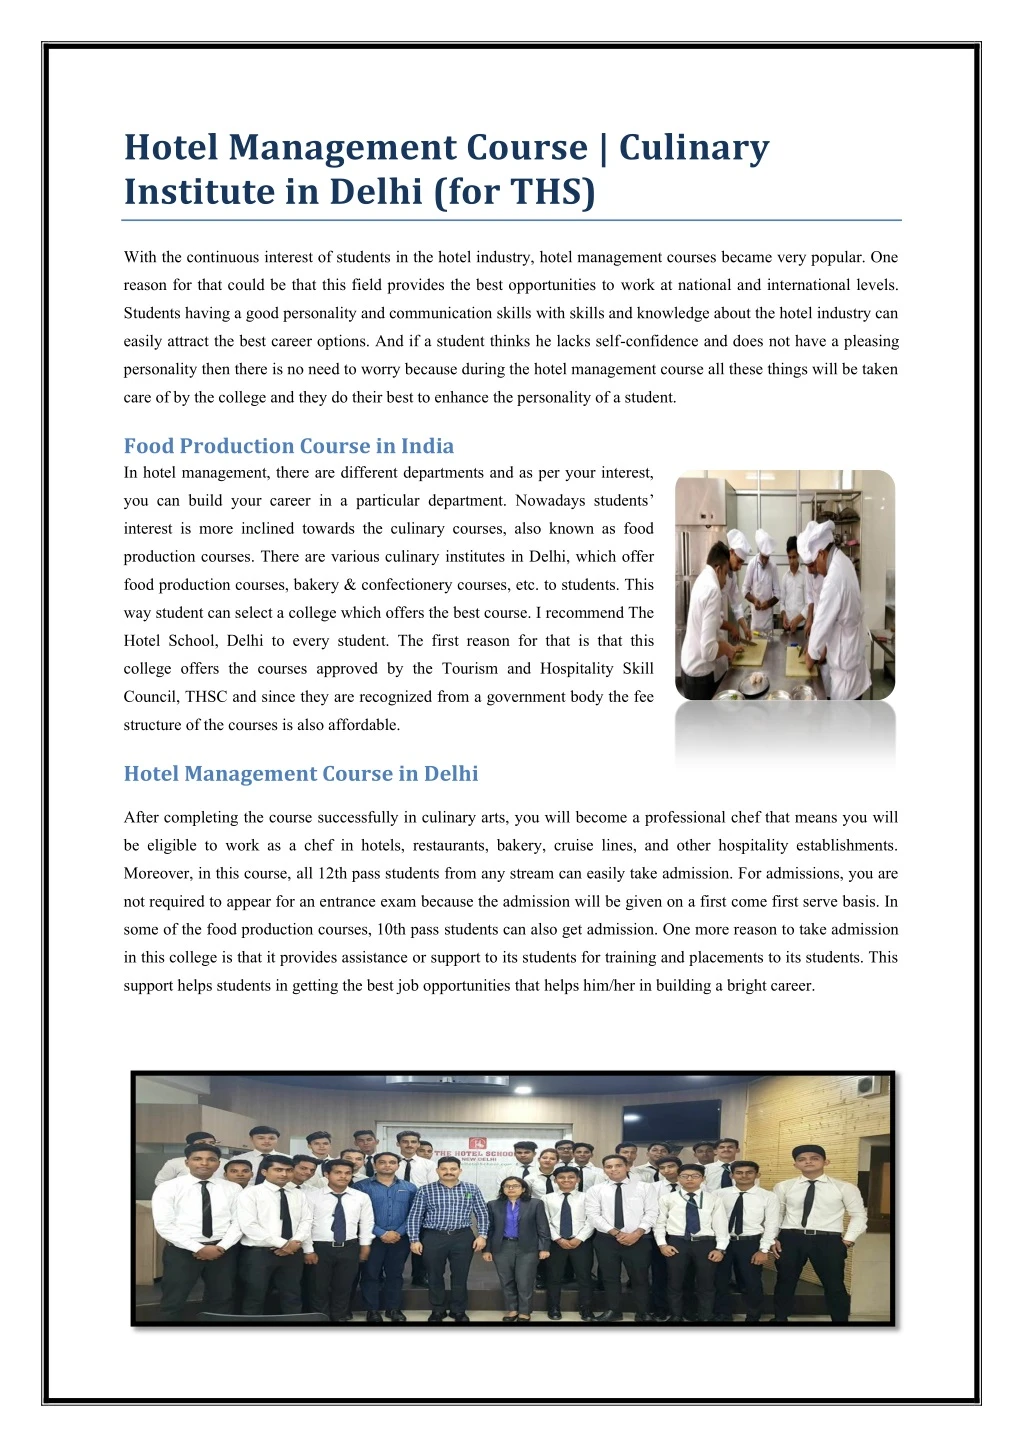 hotel management course culinary institute